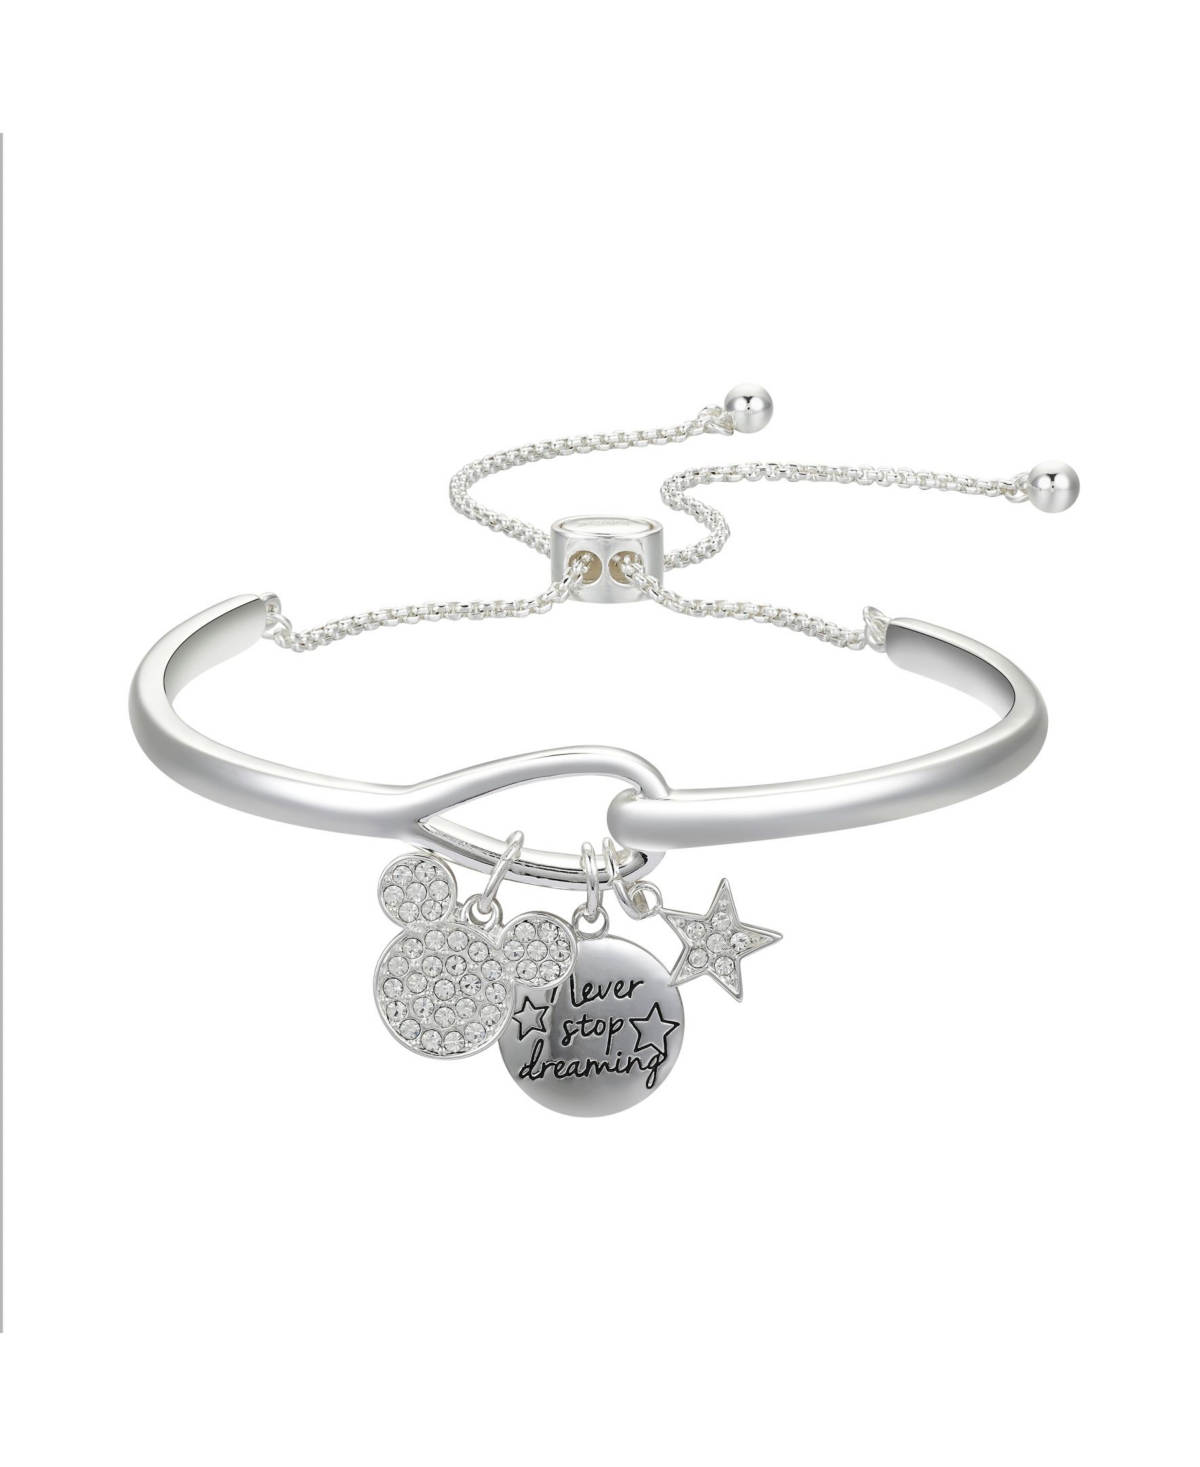 Fine Silver Plated Crystal Mickey Mouse "Never Stop Dreaming" Adjustable Cuff Bracelet - Silver